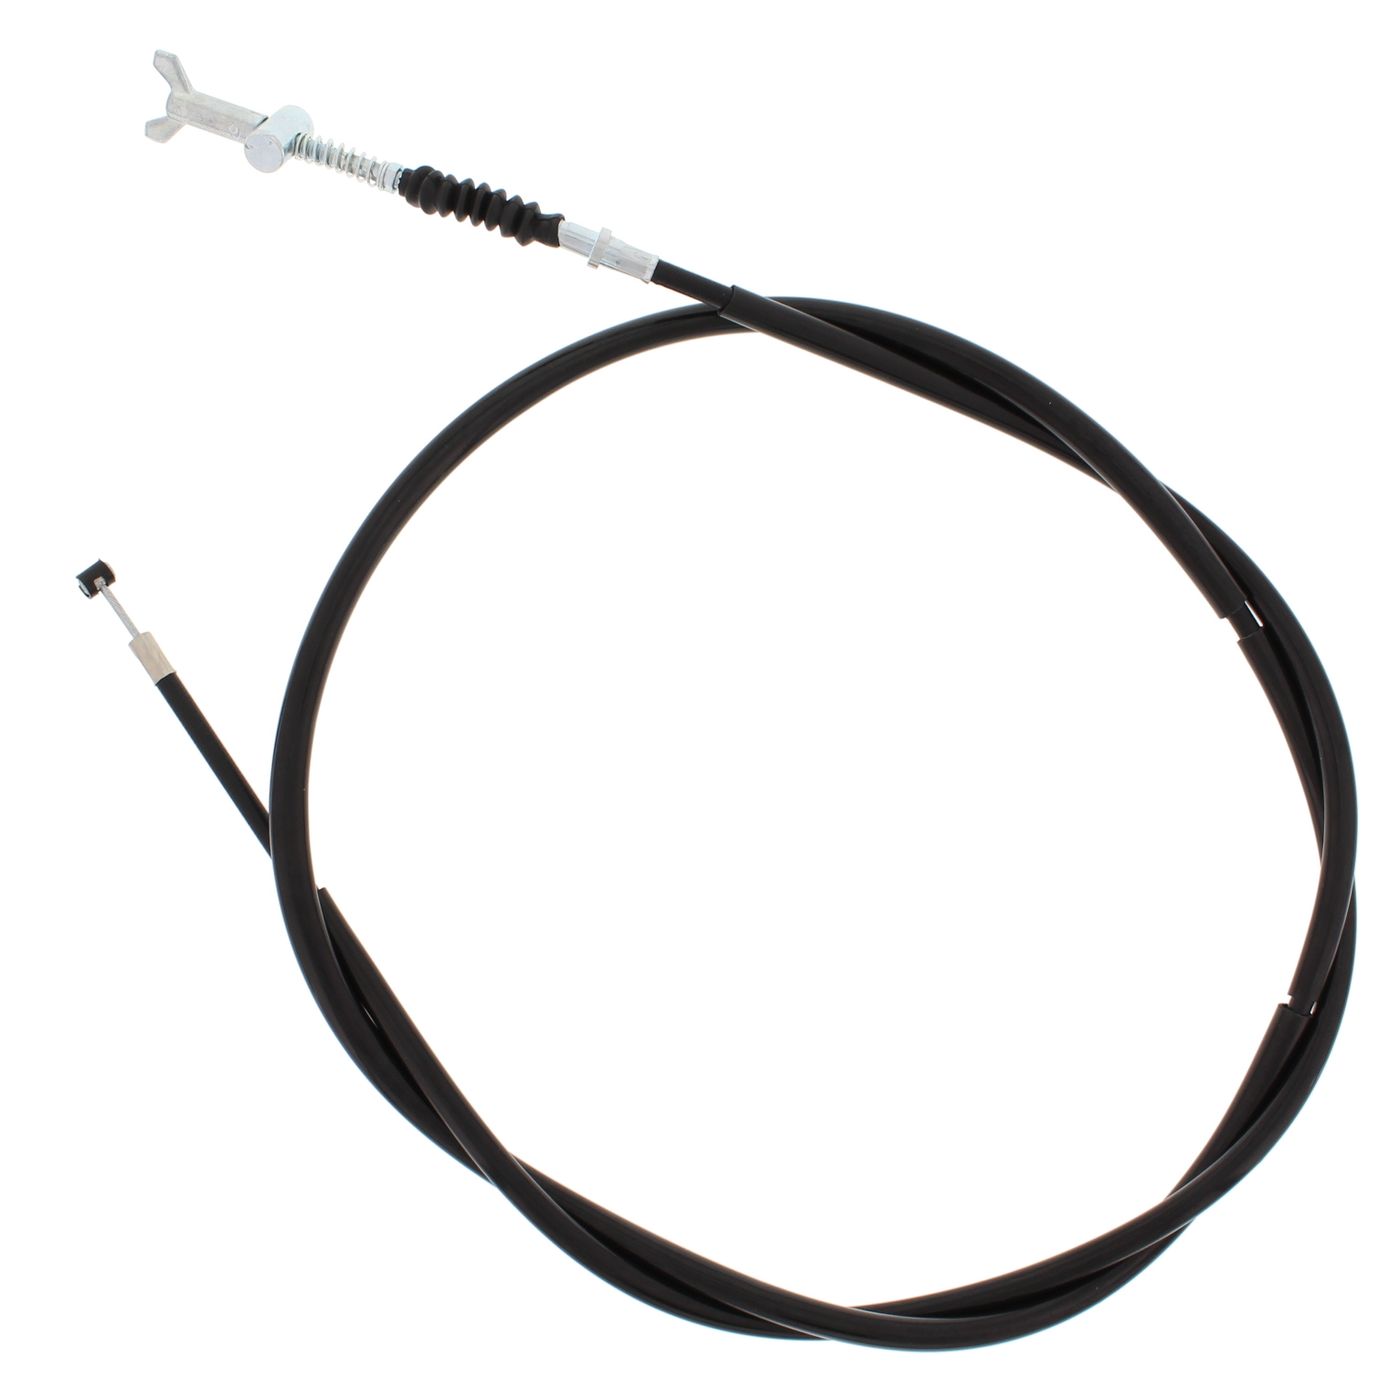 Wrp Brake Cables - WRP454065 image